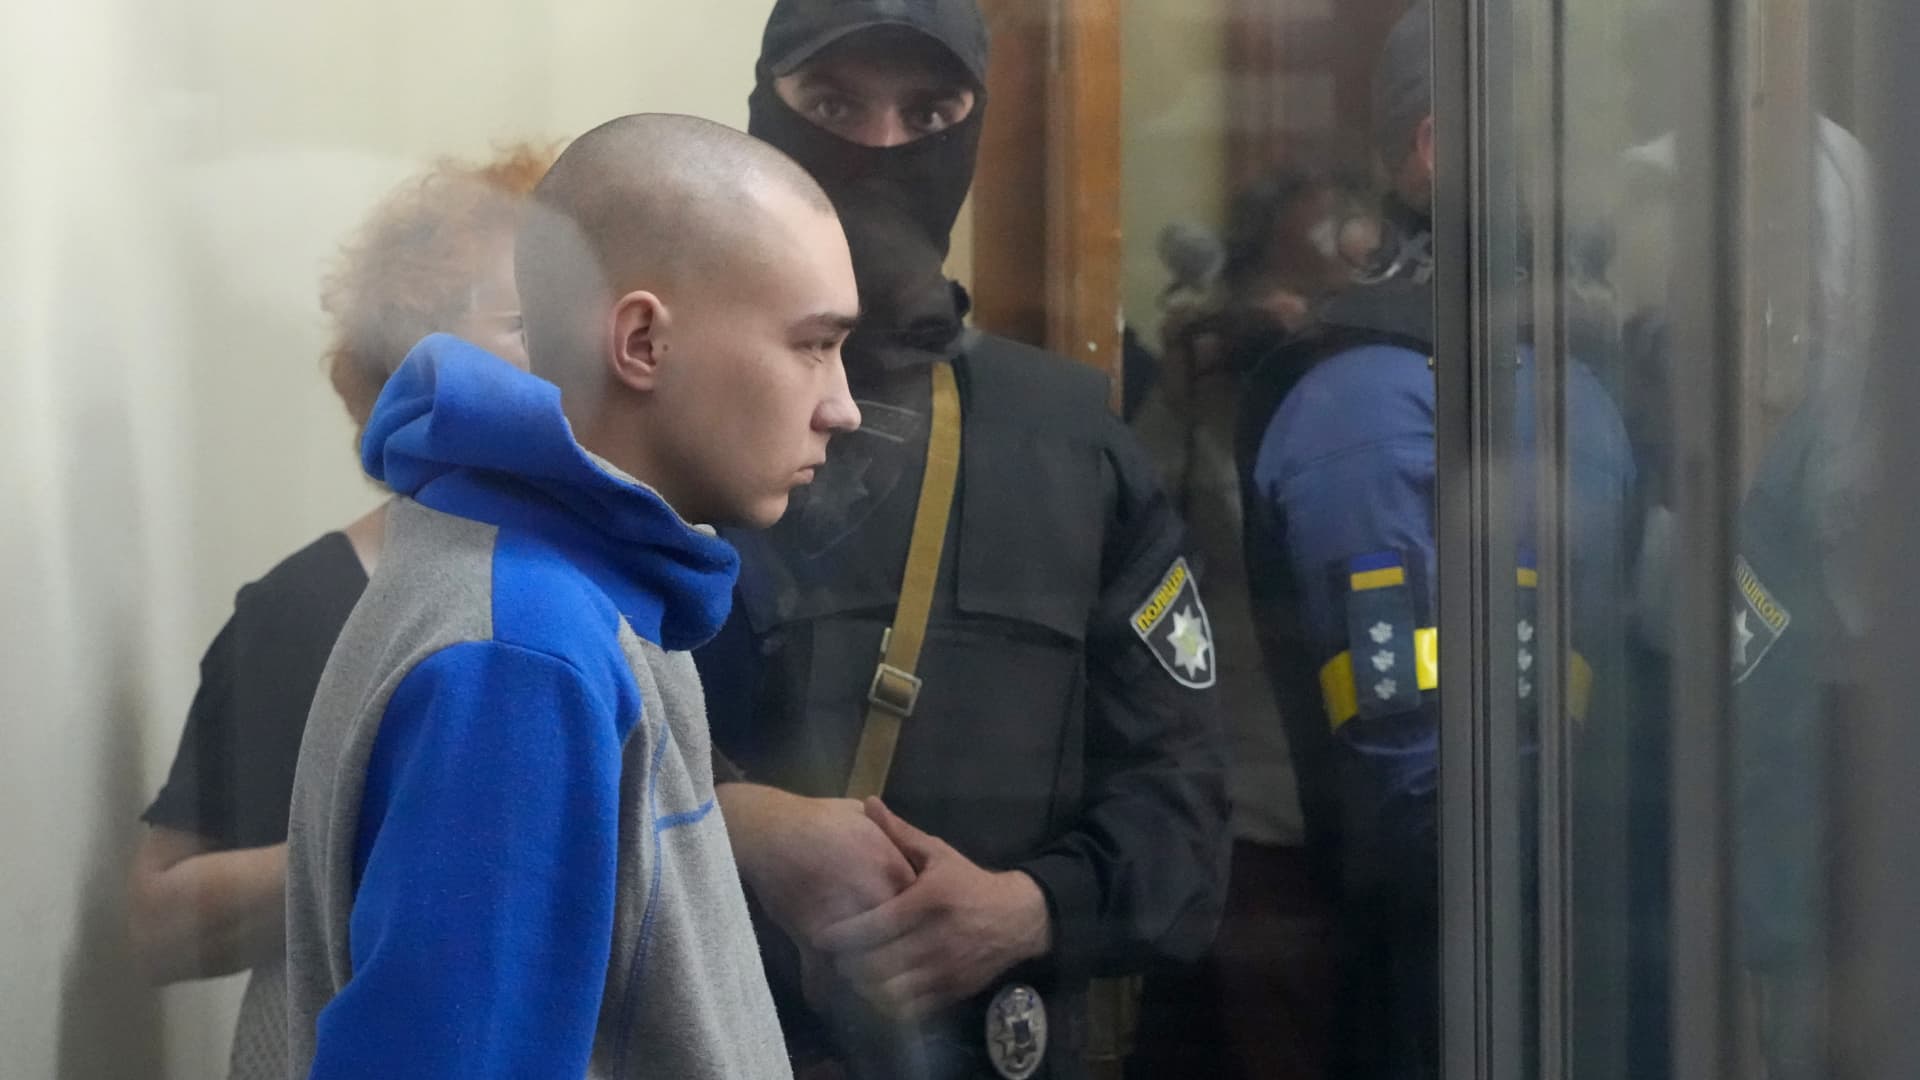 Russian army Sergeant Vadim Shishimarin, 21, arrives for a court hearing in Kyiv, Ukraine, Friday, May 13, 2022. The trial of a Russian soldier accused of killing a Ukrainian civilian opened Friday, the first war crimes trial since Moscow's invasion of its neighbor.